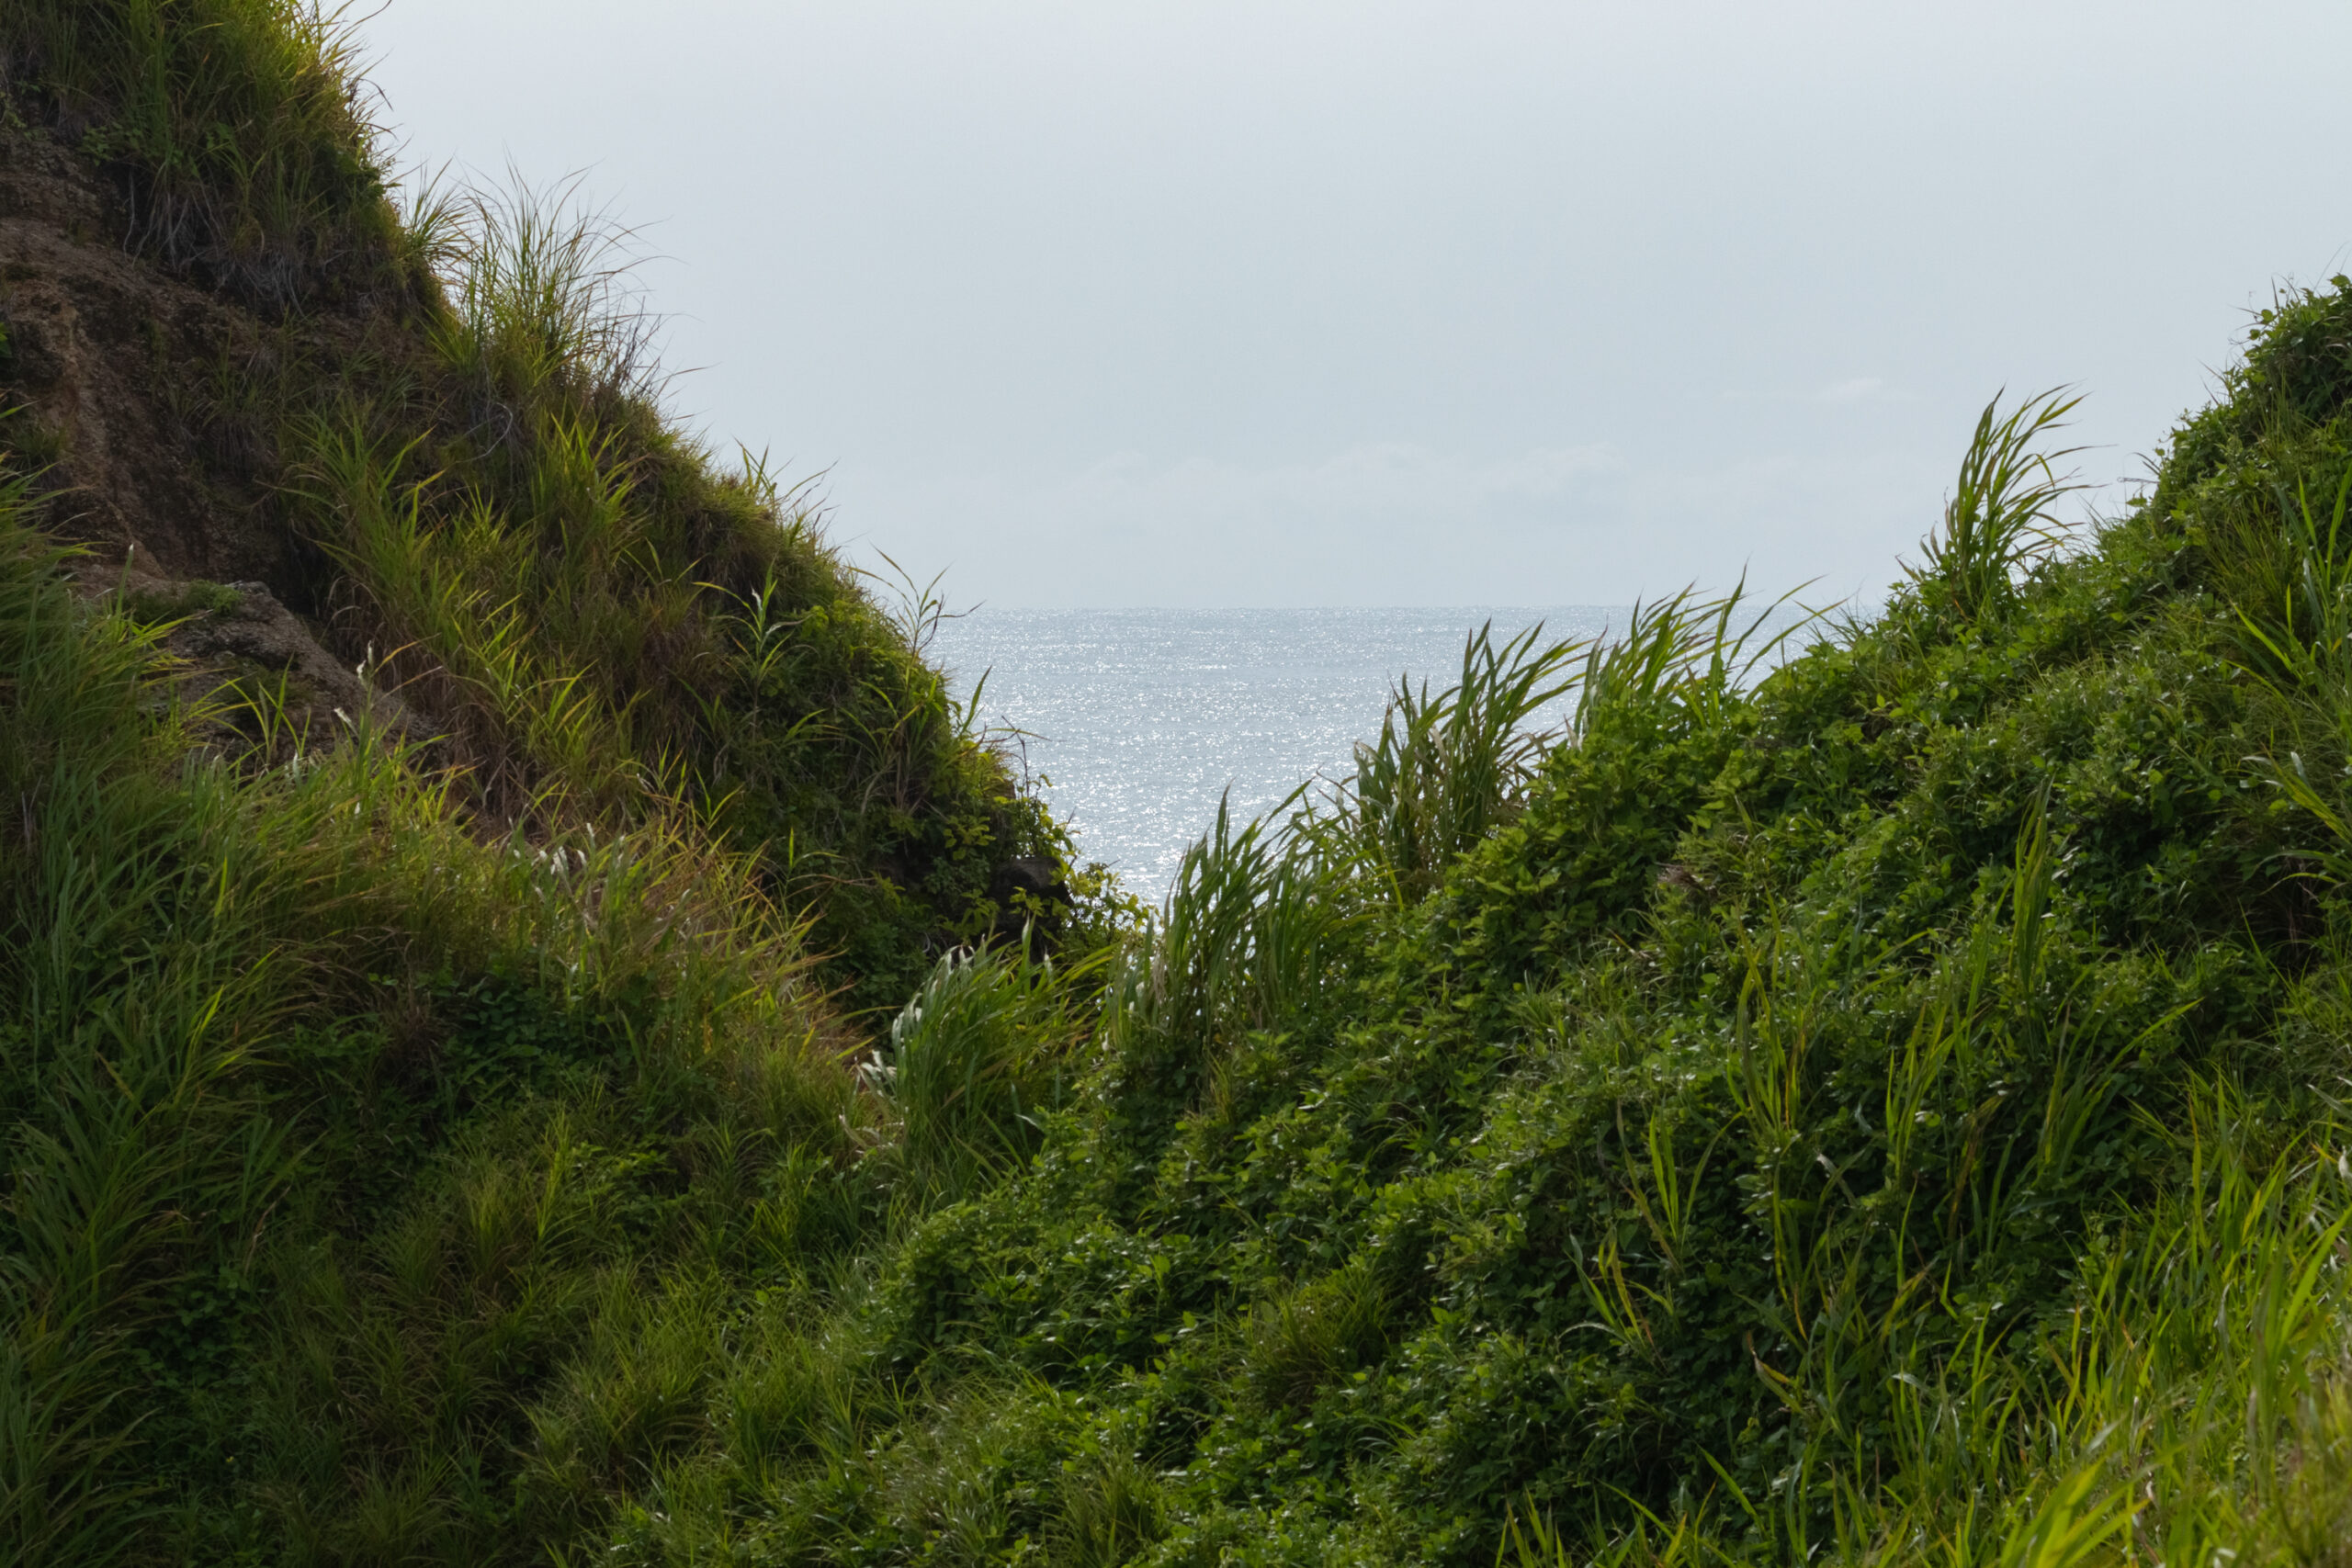 Photograph of a lush, green landscape in the Guanacaste rainy season, contrasted against the ocean in the distance.